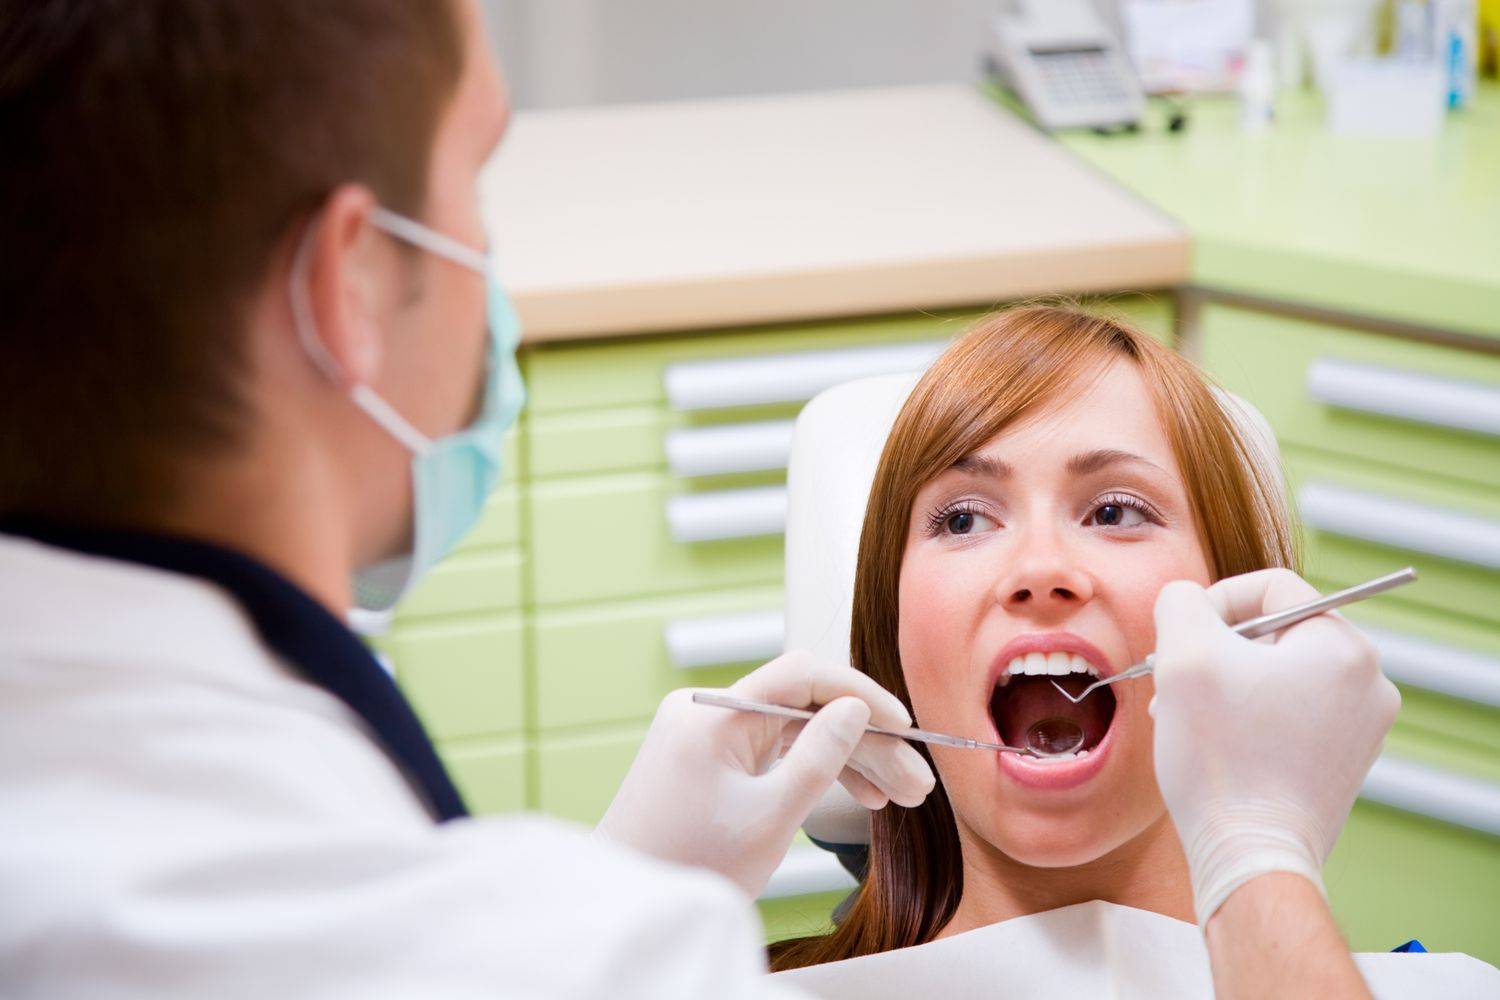 Can Dental Insurance Cover Veneers? Here’s What You Should Know